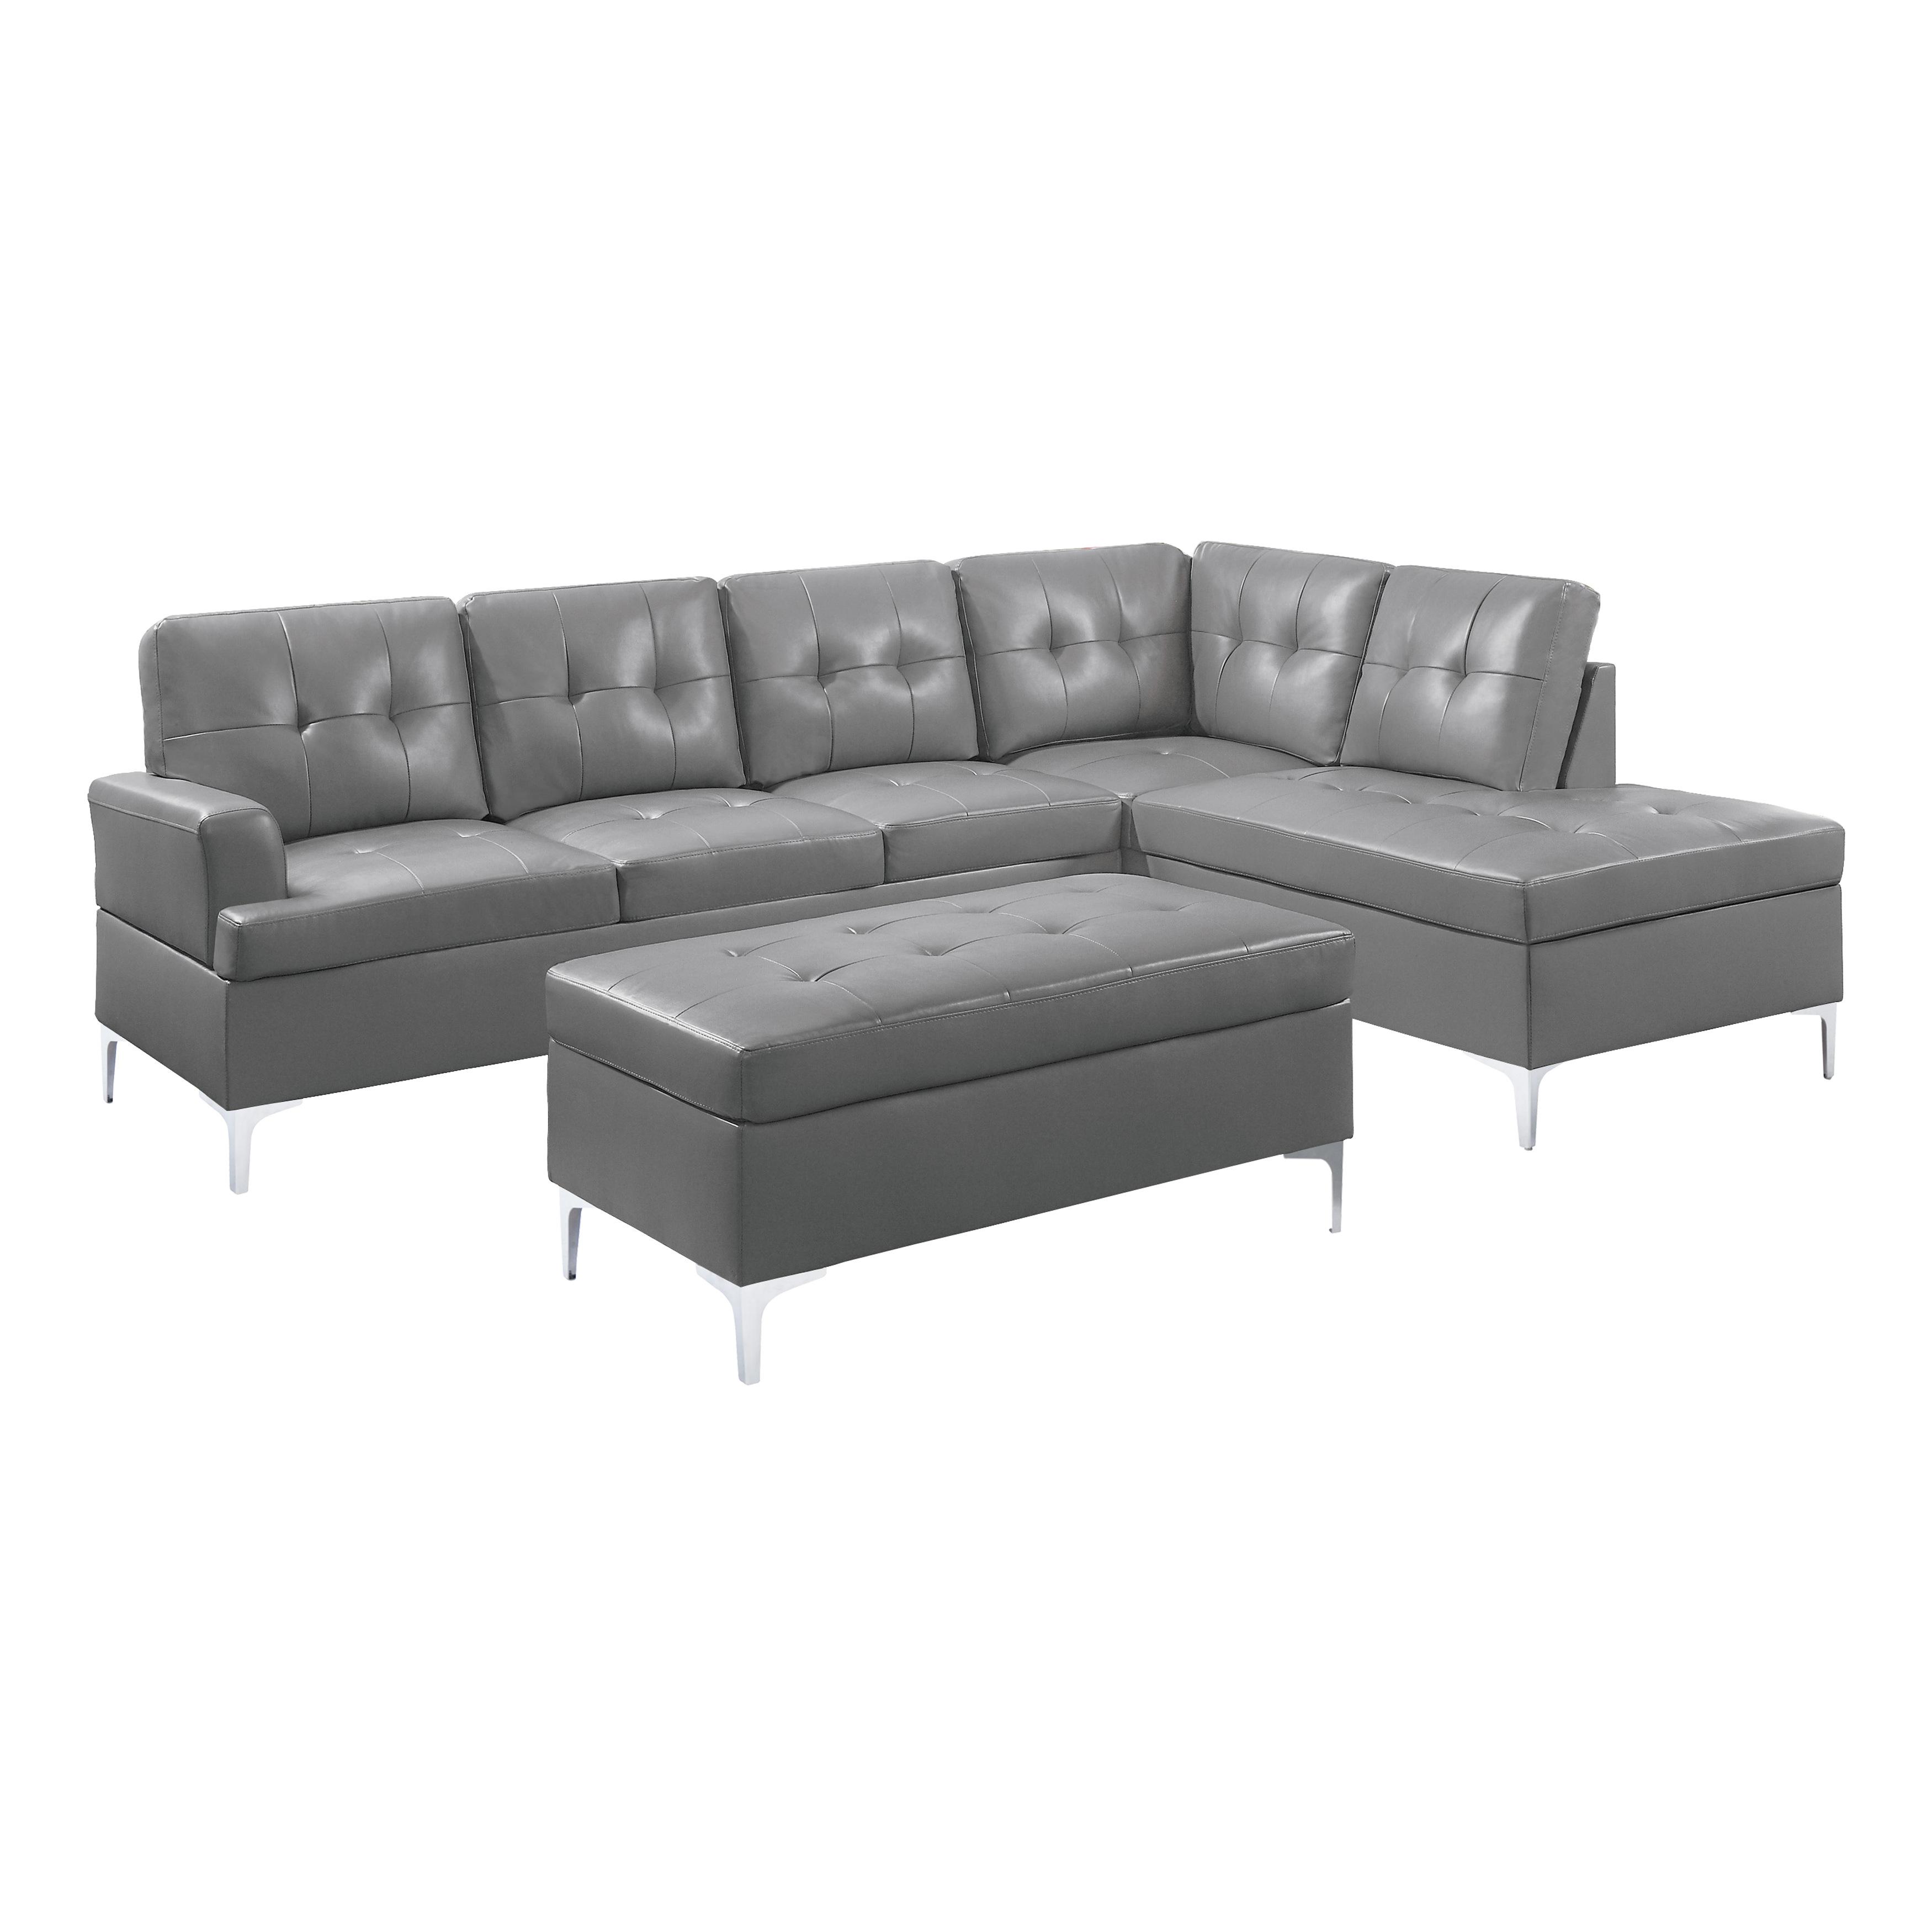 Contemporary Sectional w/ Ottoman 8378GRY*3 Barrington 8378GRY*3 in Gray Faux Leather